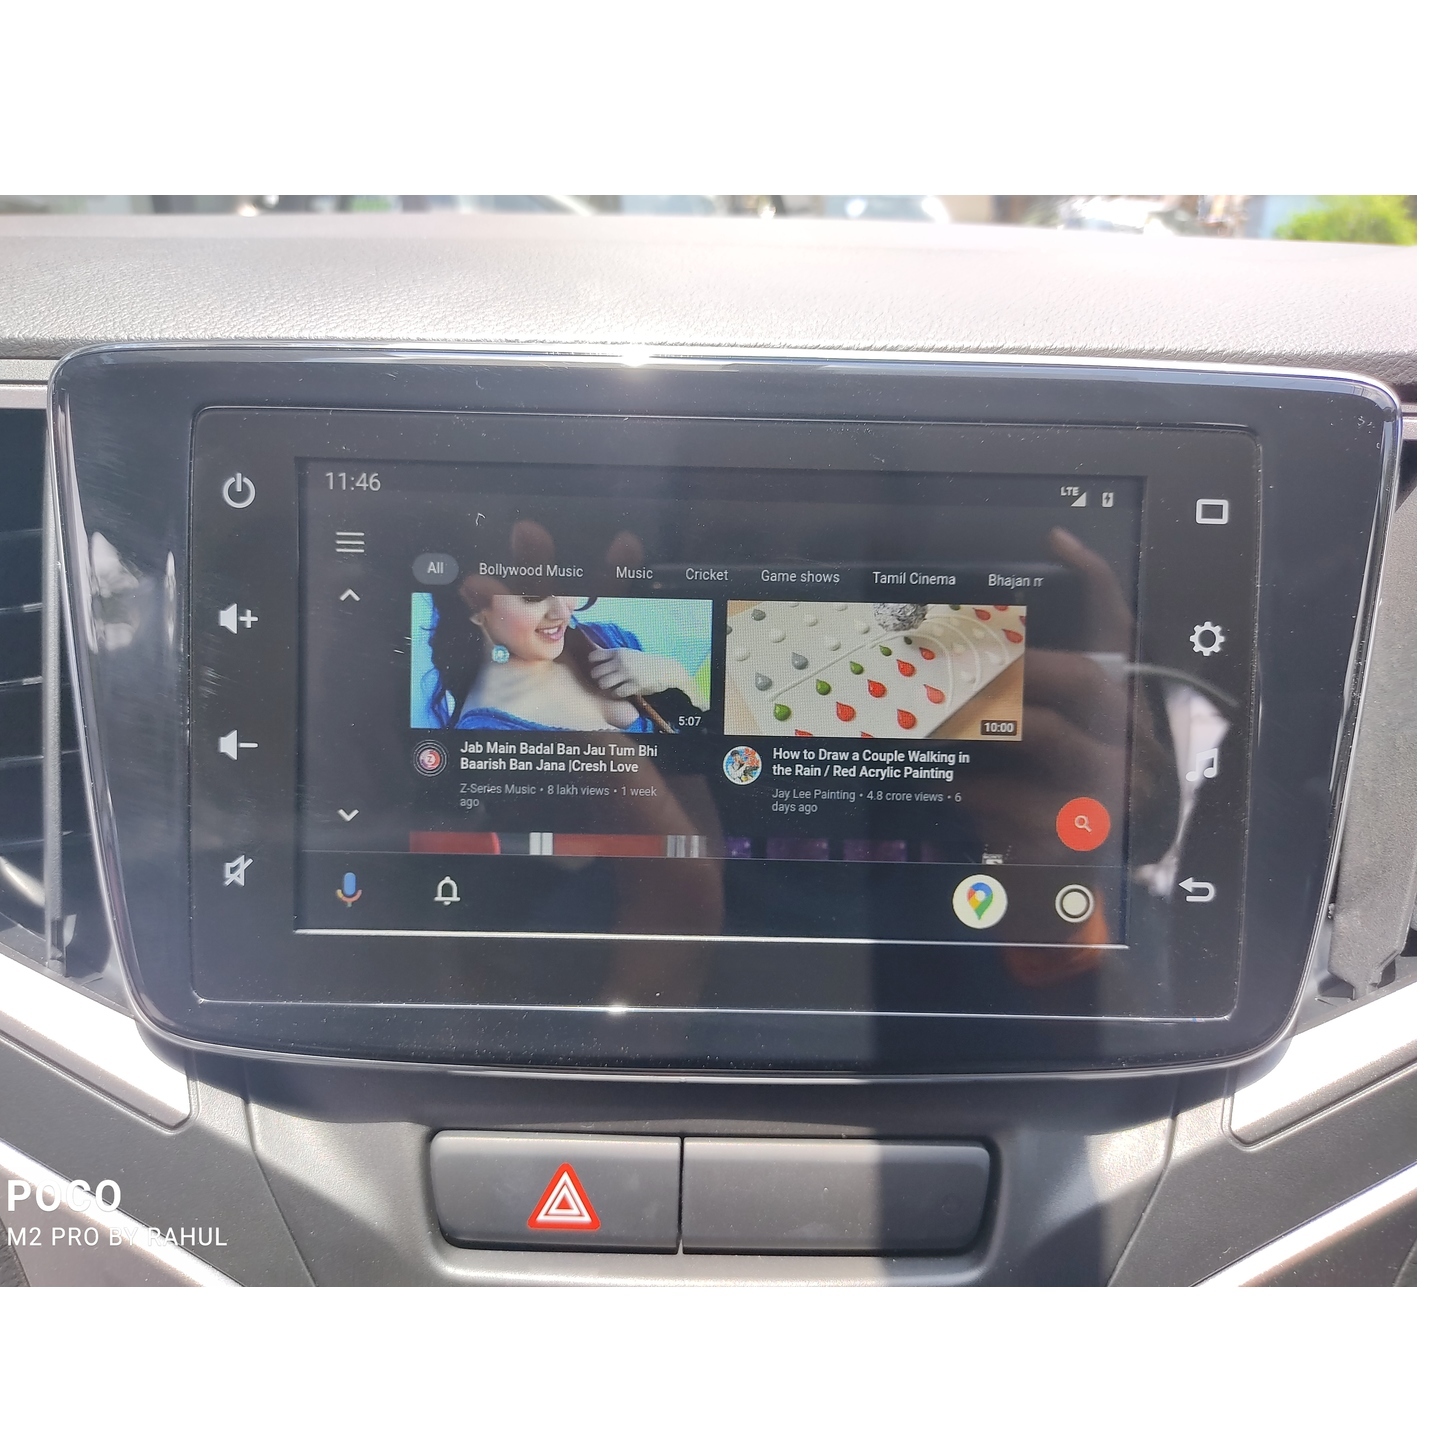 YouTube player software for infotainment system